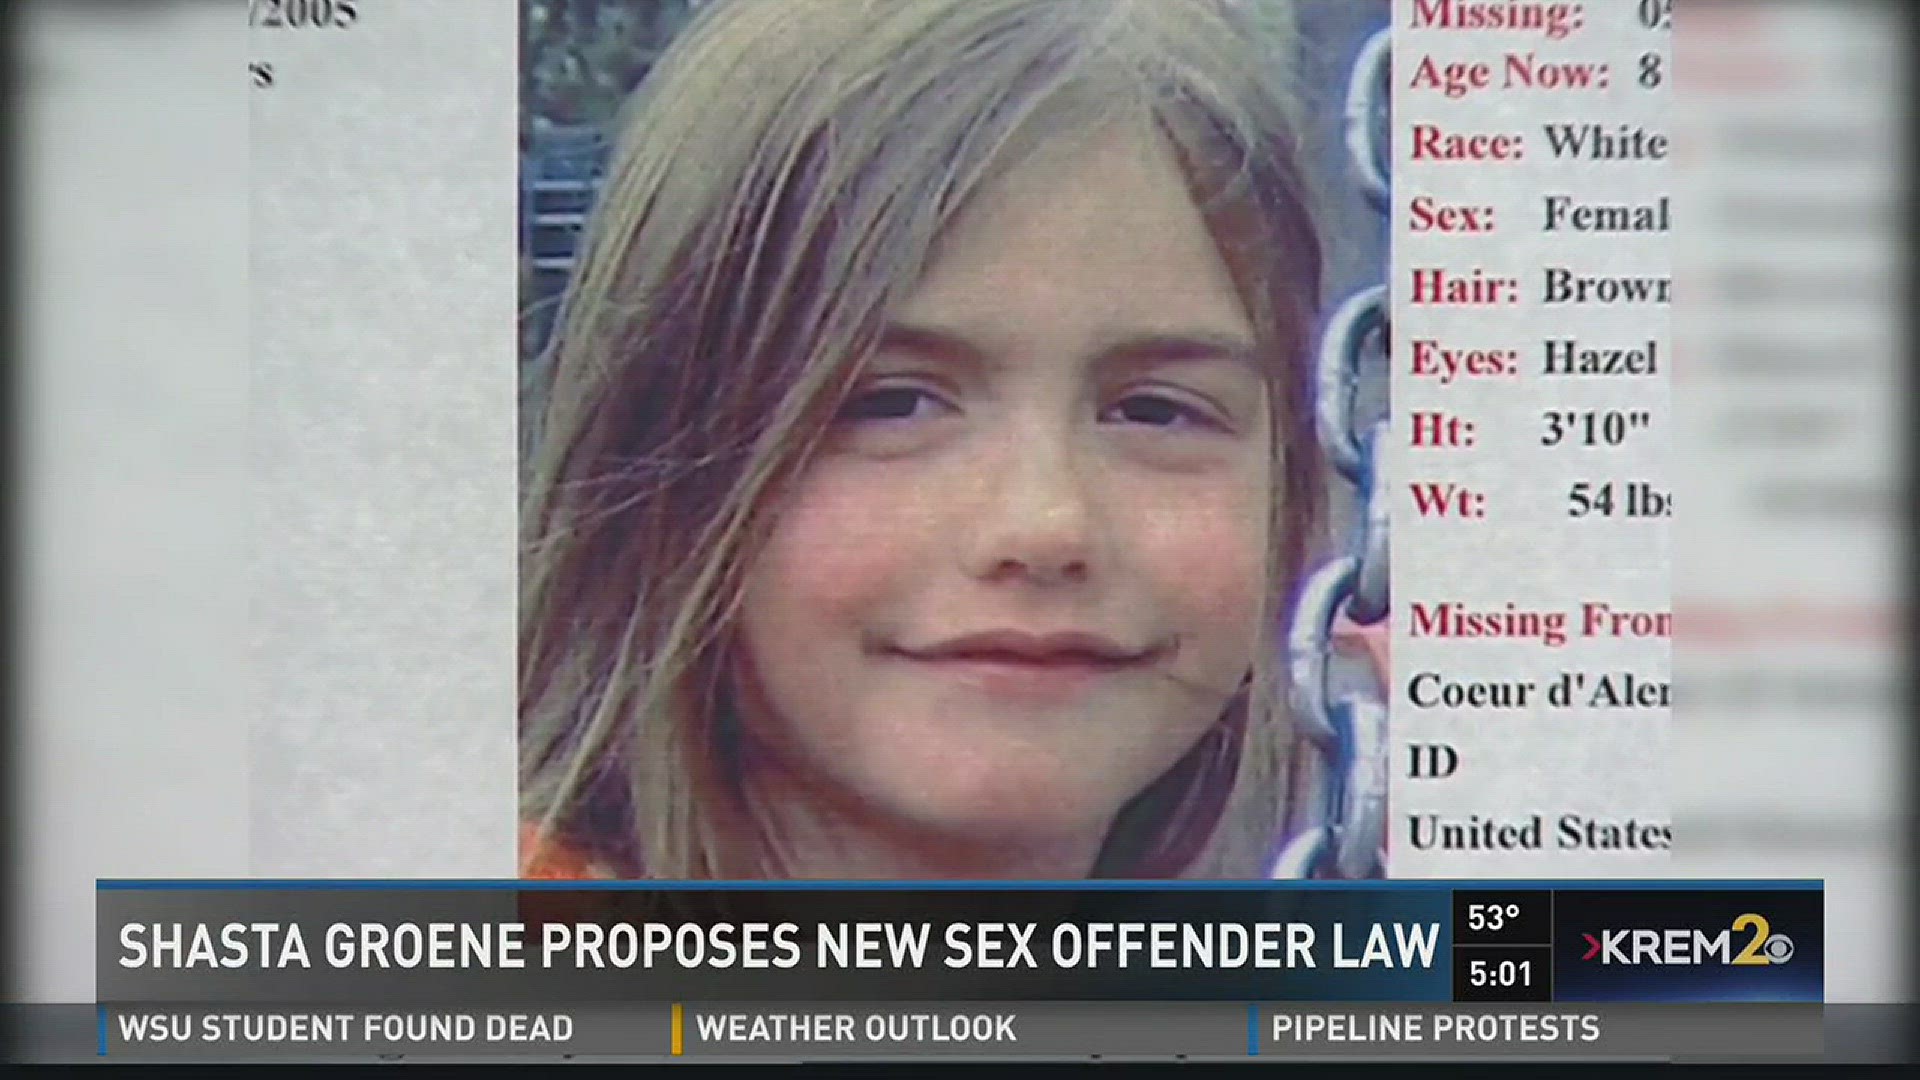 Shasta Groene calls on lawmakers, starts petition